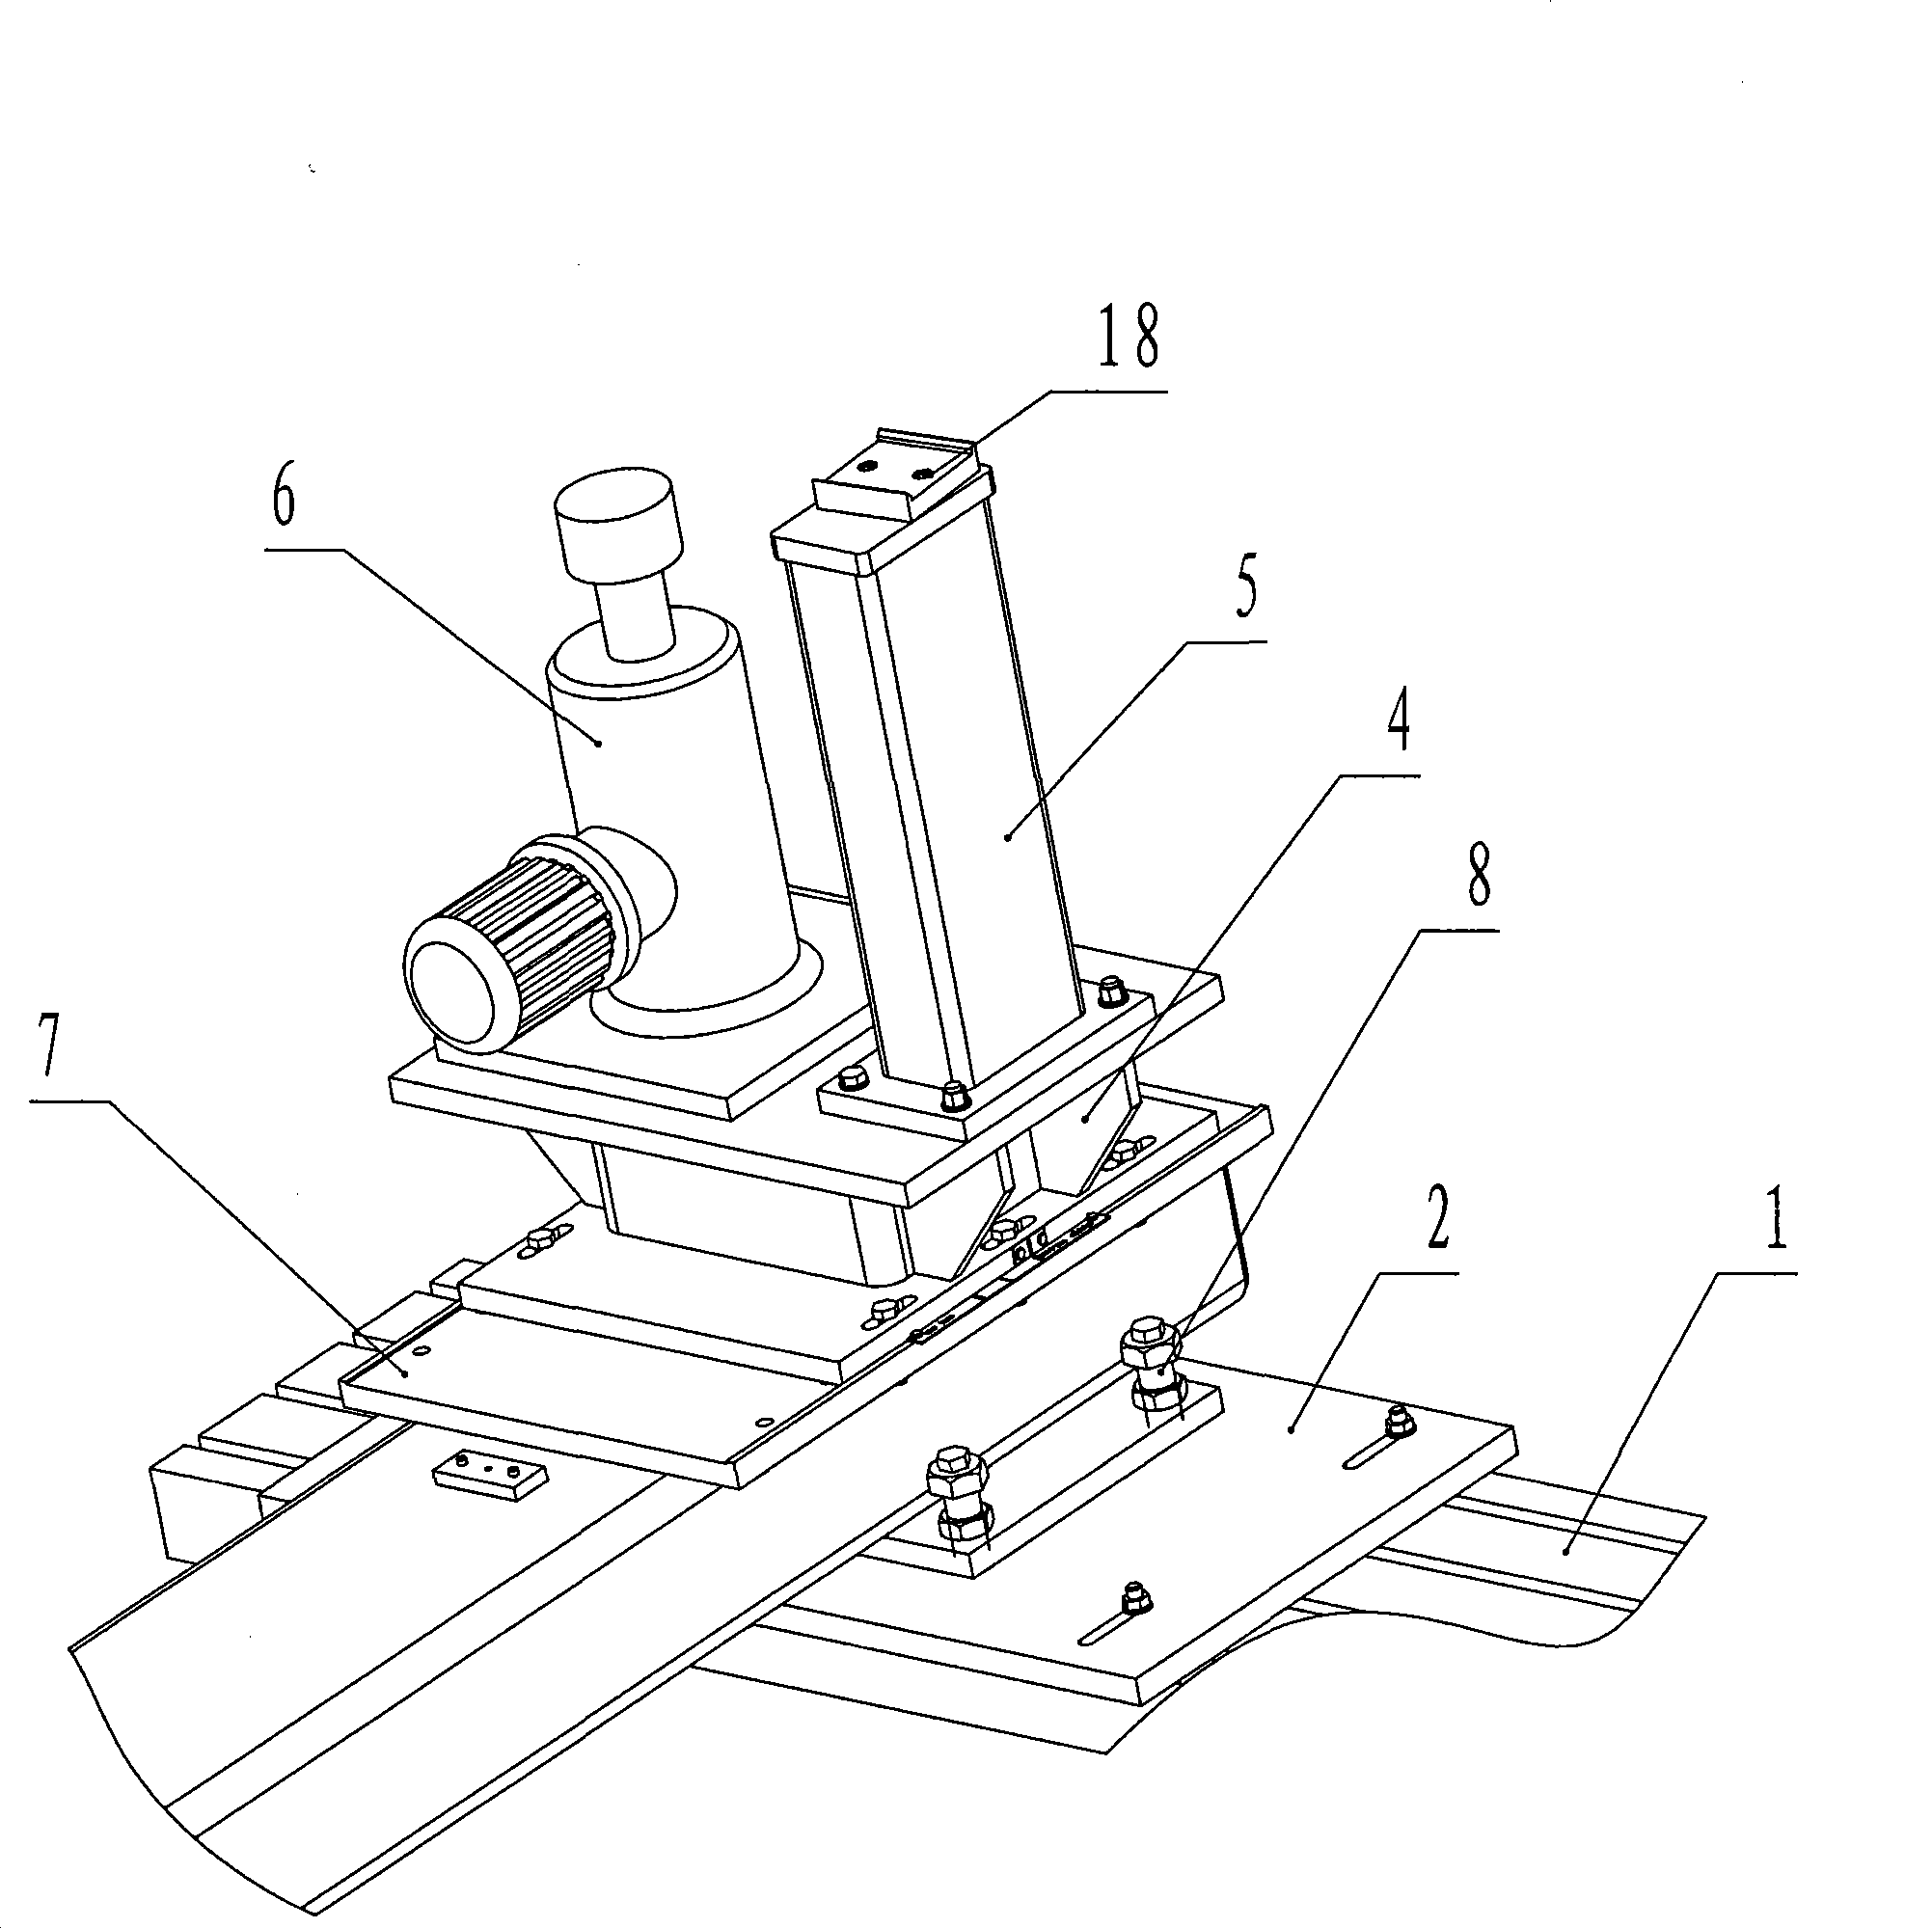 Four-angle weighing apparatus for vehicle